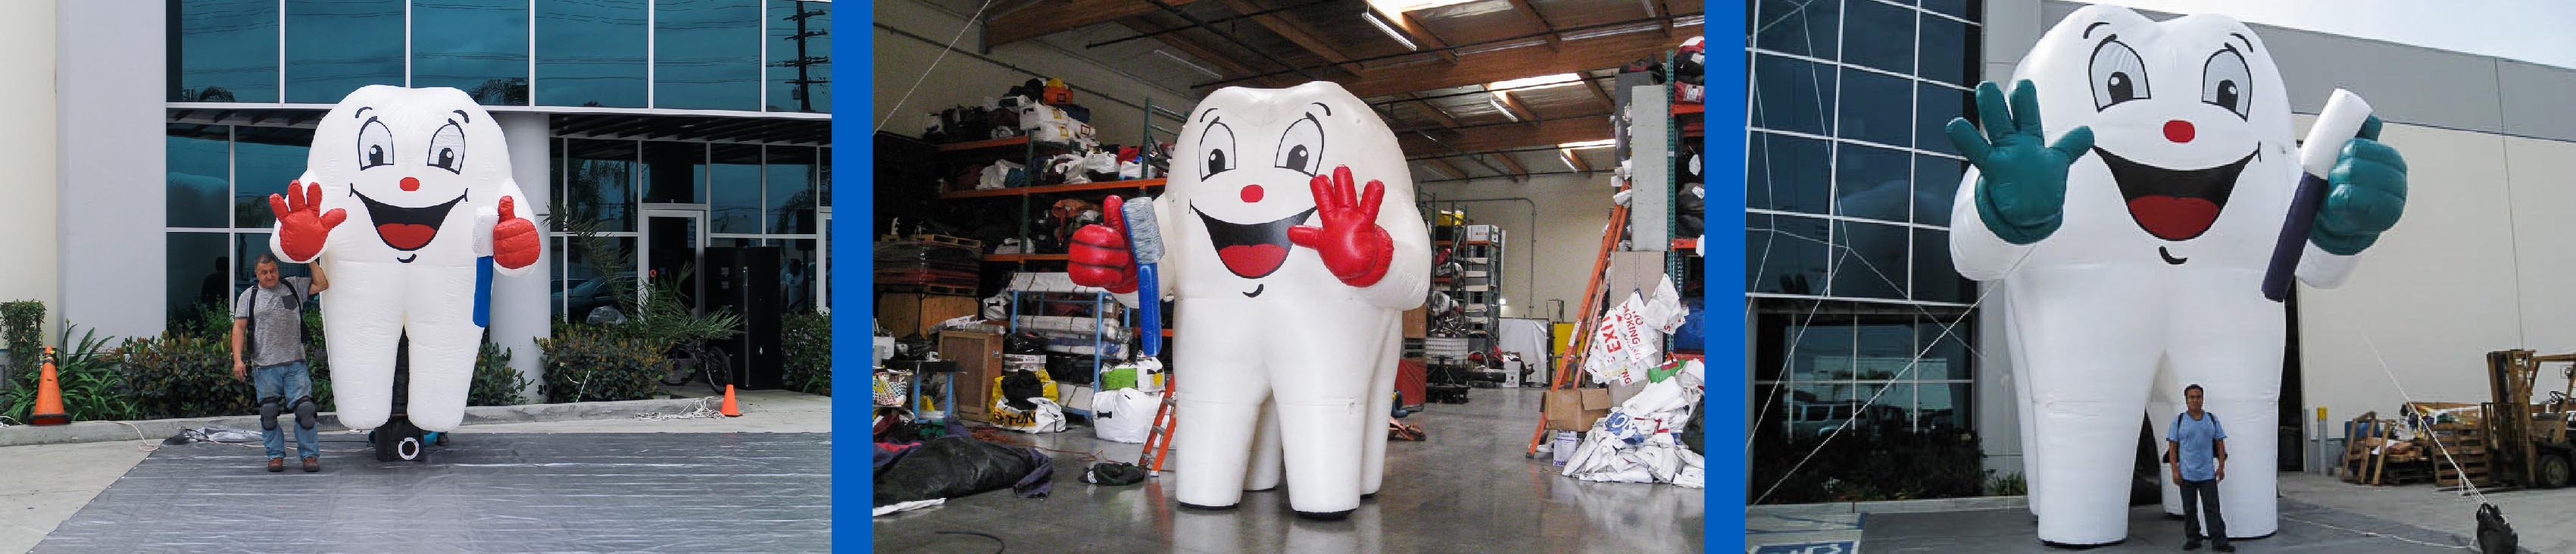 inflatable-tooth-sizes